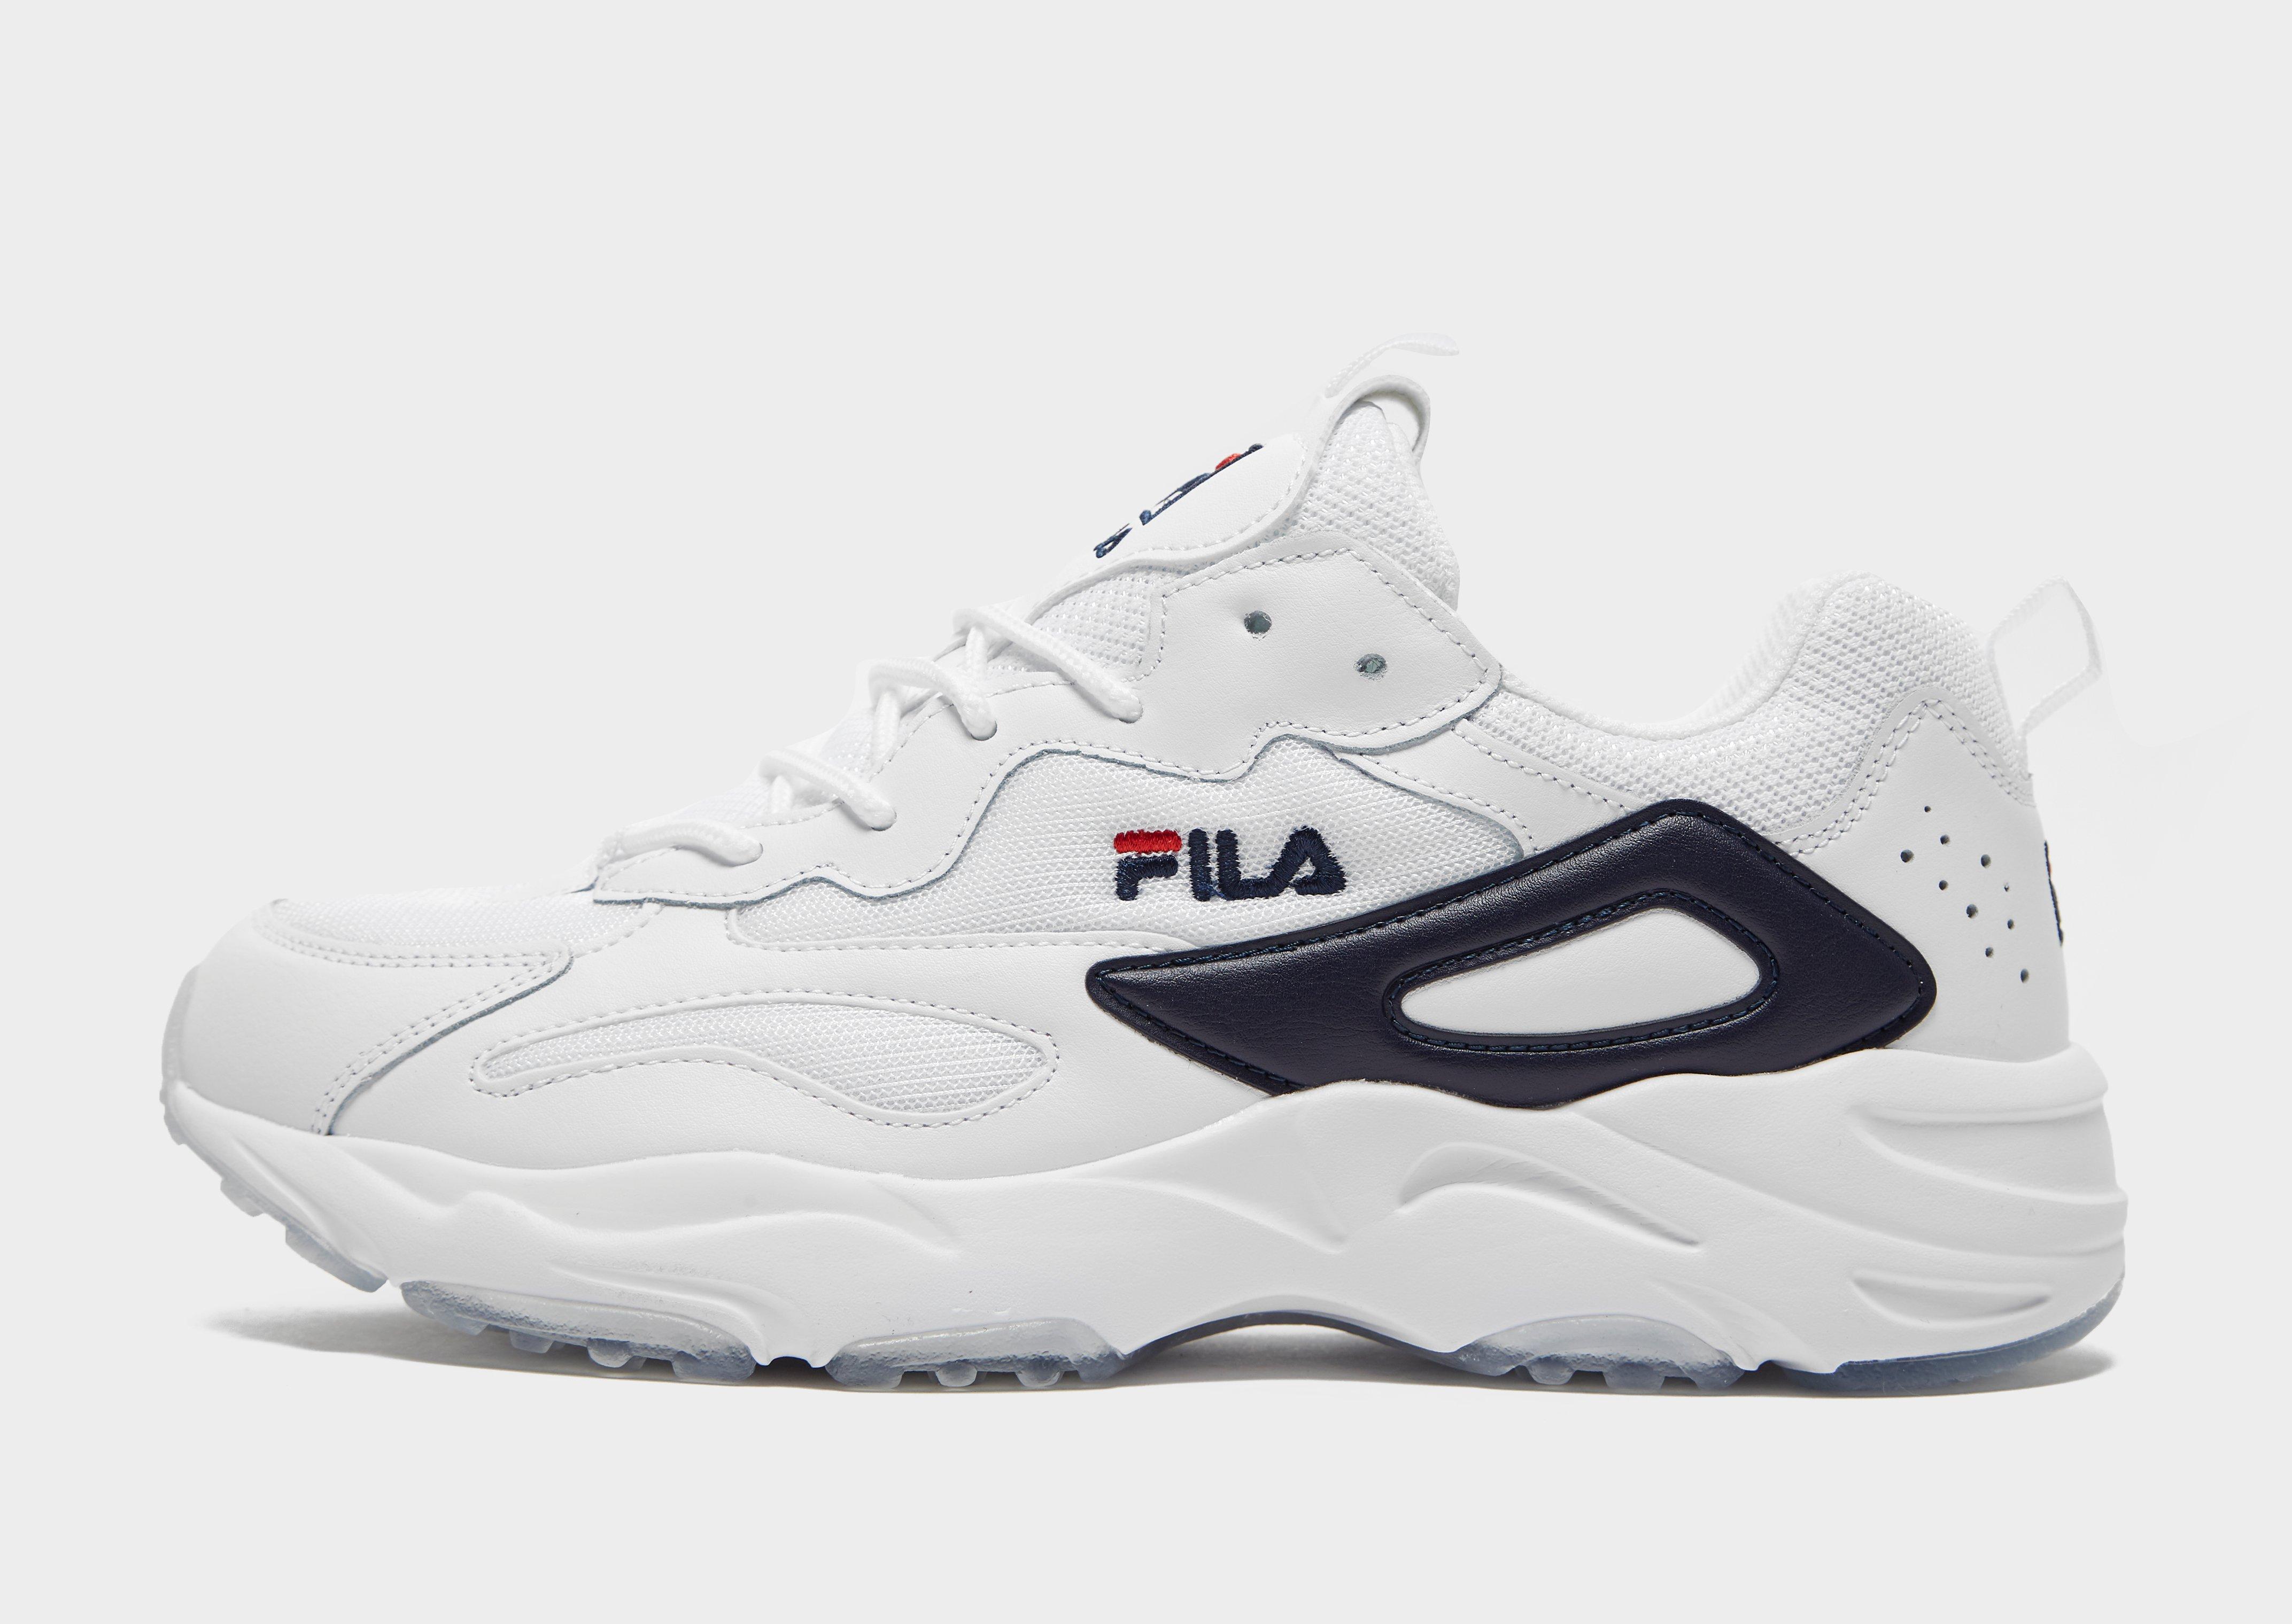 fila ray tracer homme france